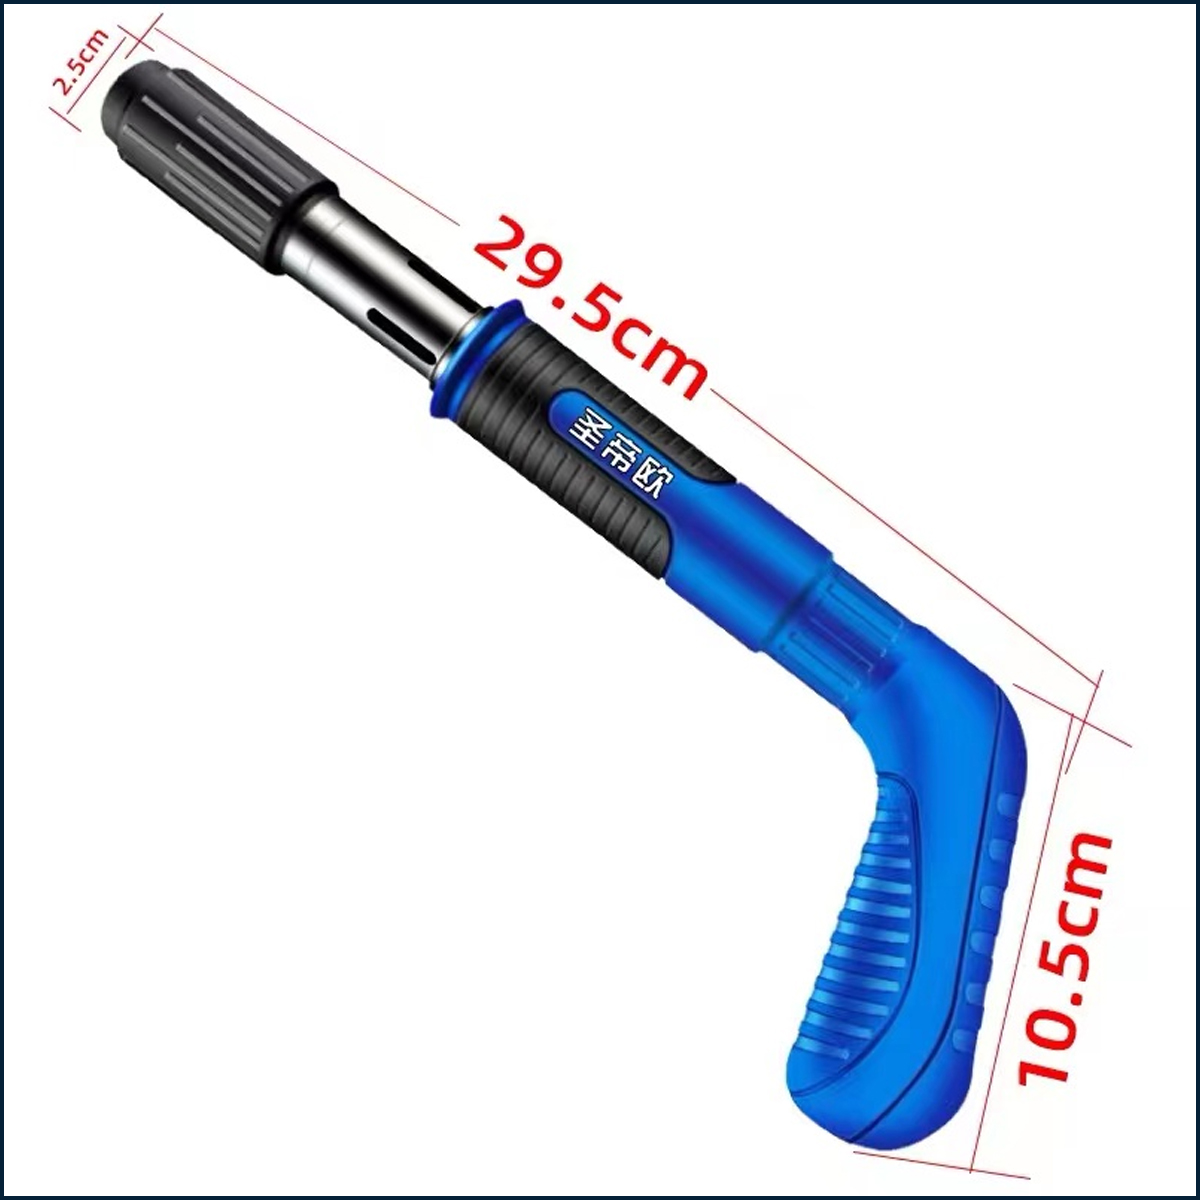 Electric-Nail-Guns-Electric-Staple-Straight-Rechargeable-Automatic-Max-40mm-Special-Use-Wood-Working-1901163-6